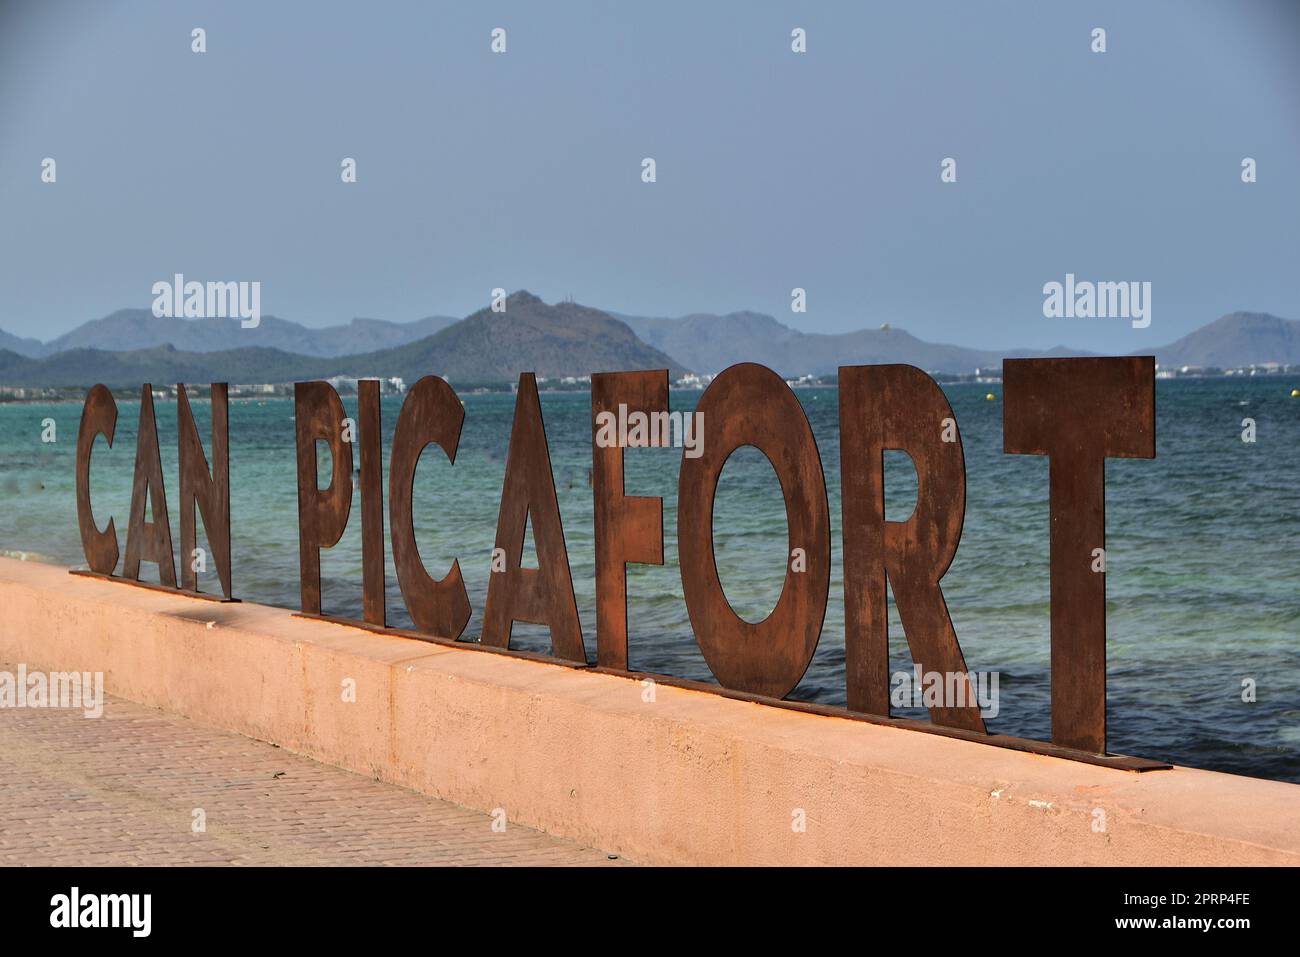 Can Picafort Foto Stock